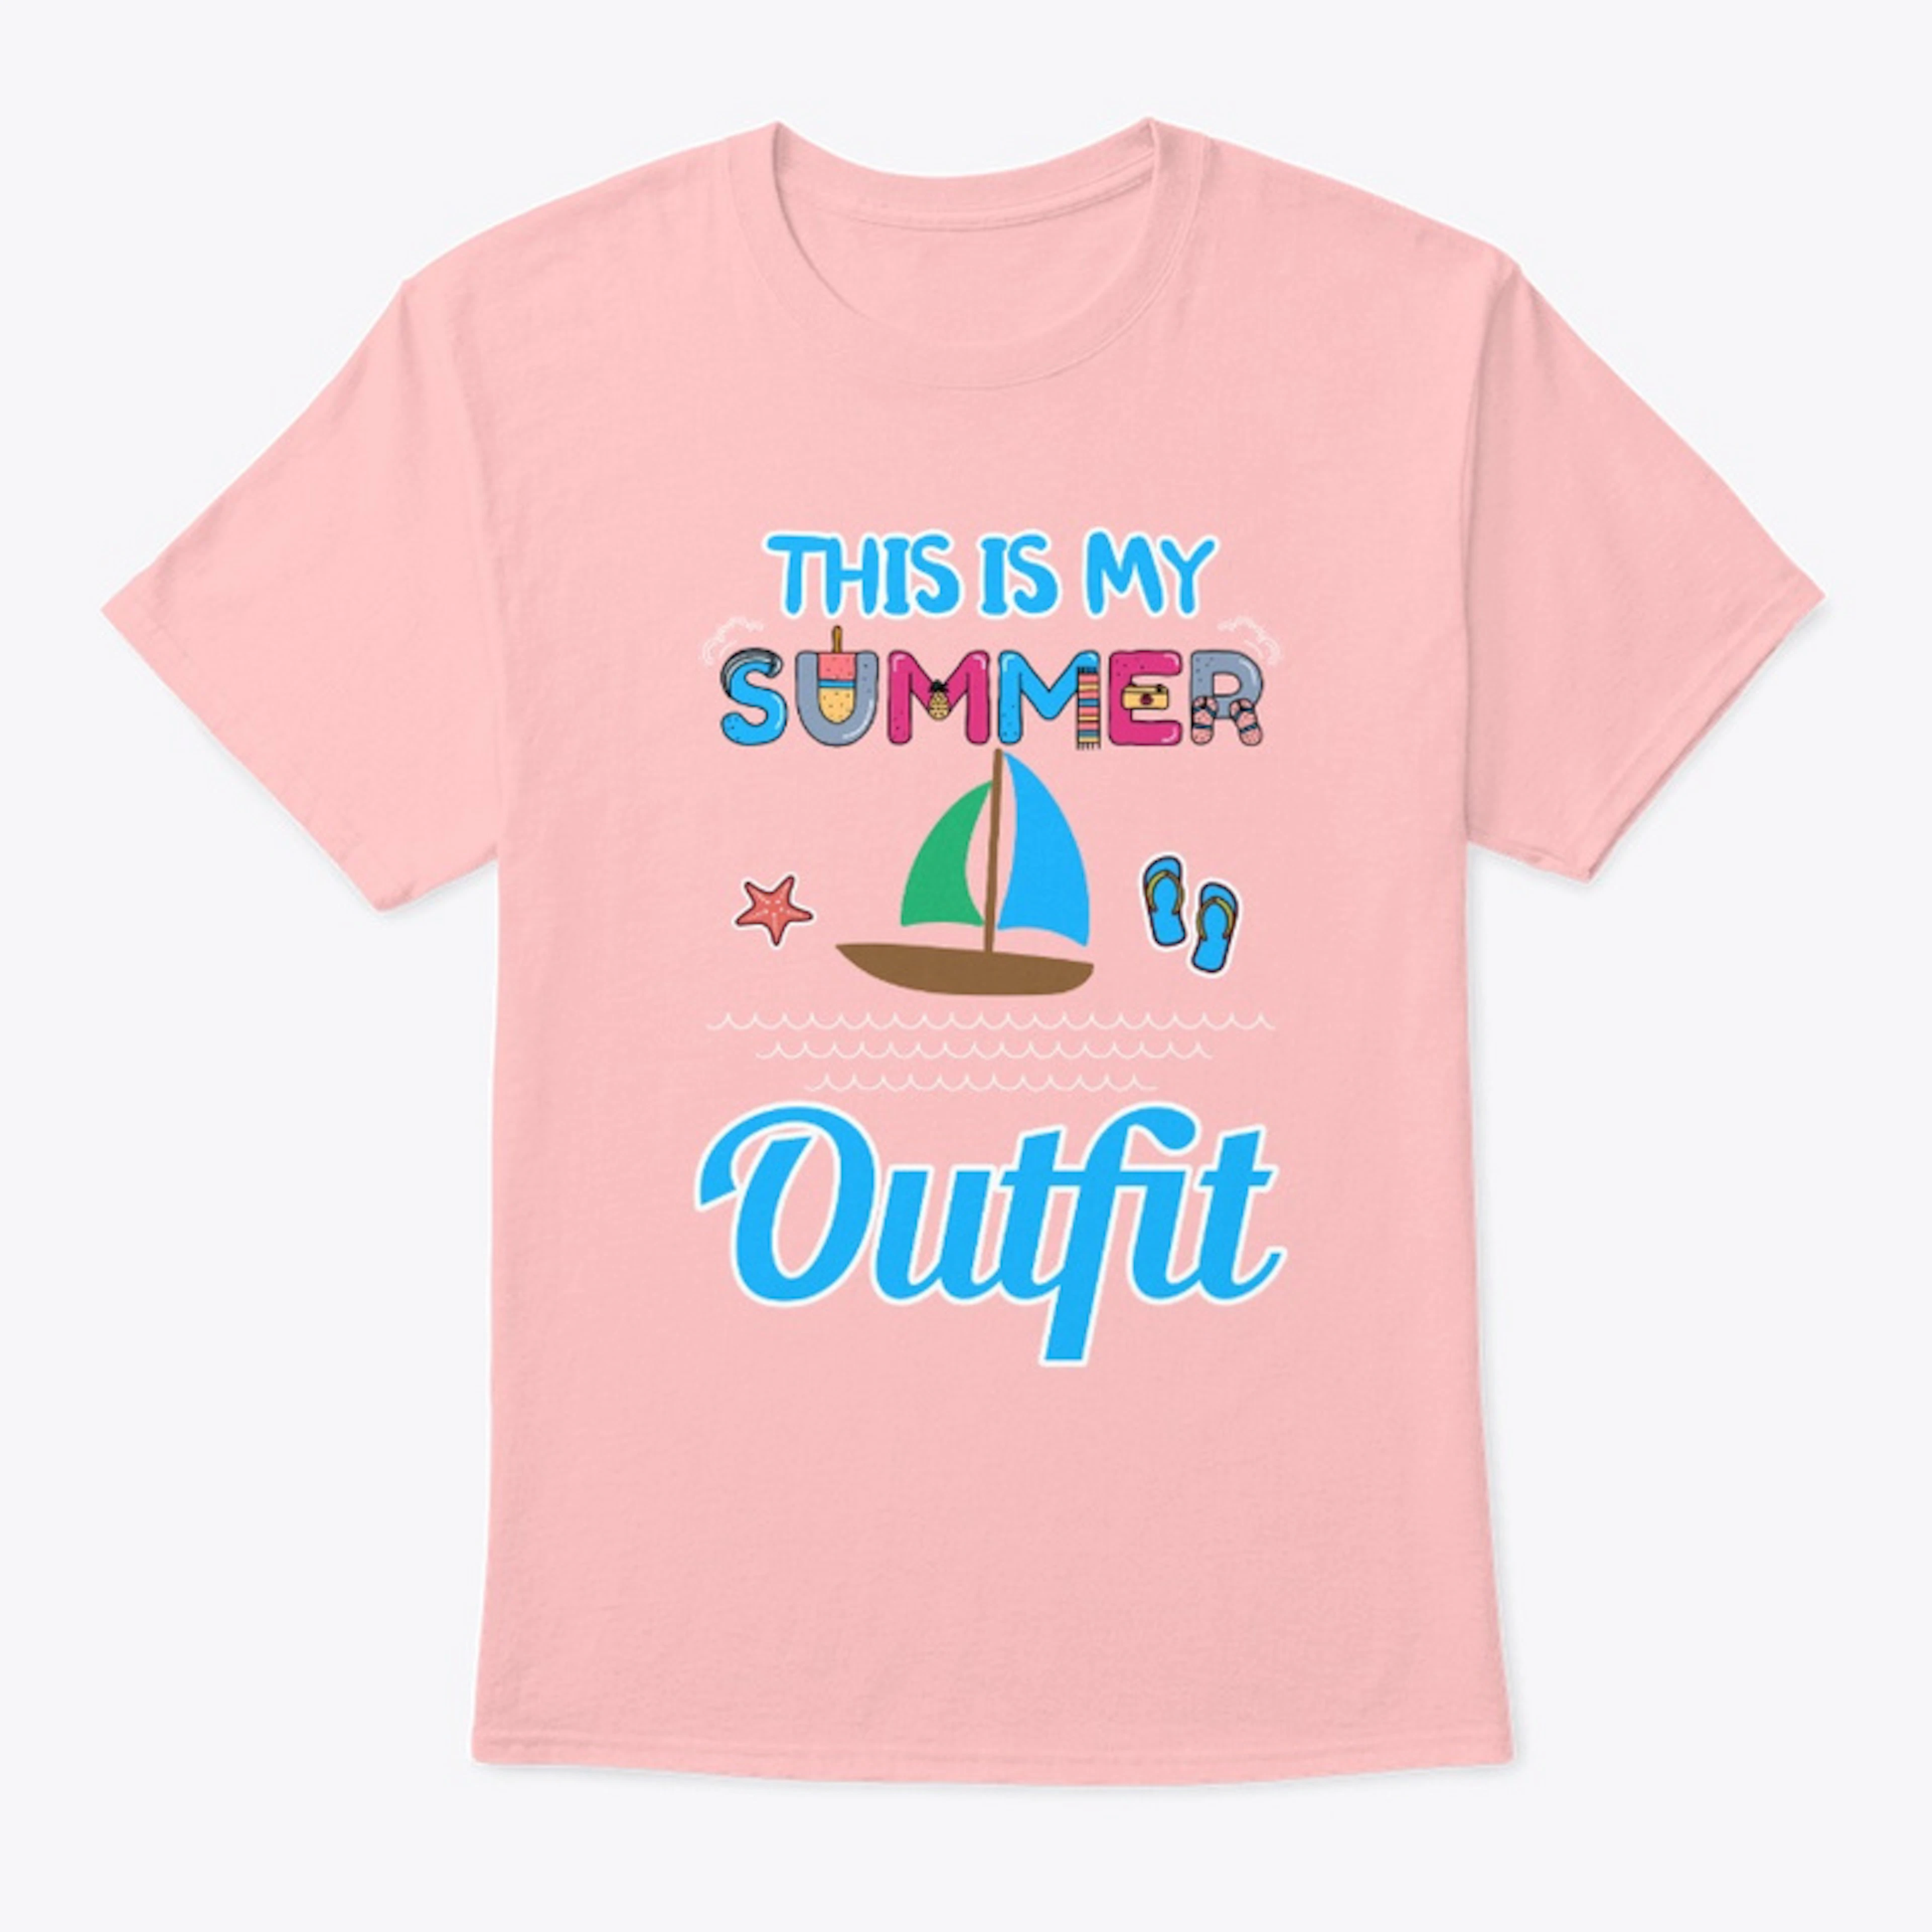 This is my summer outfit